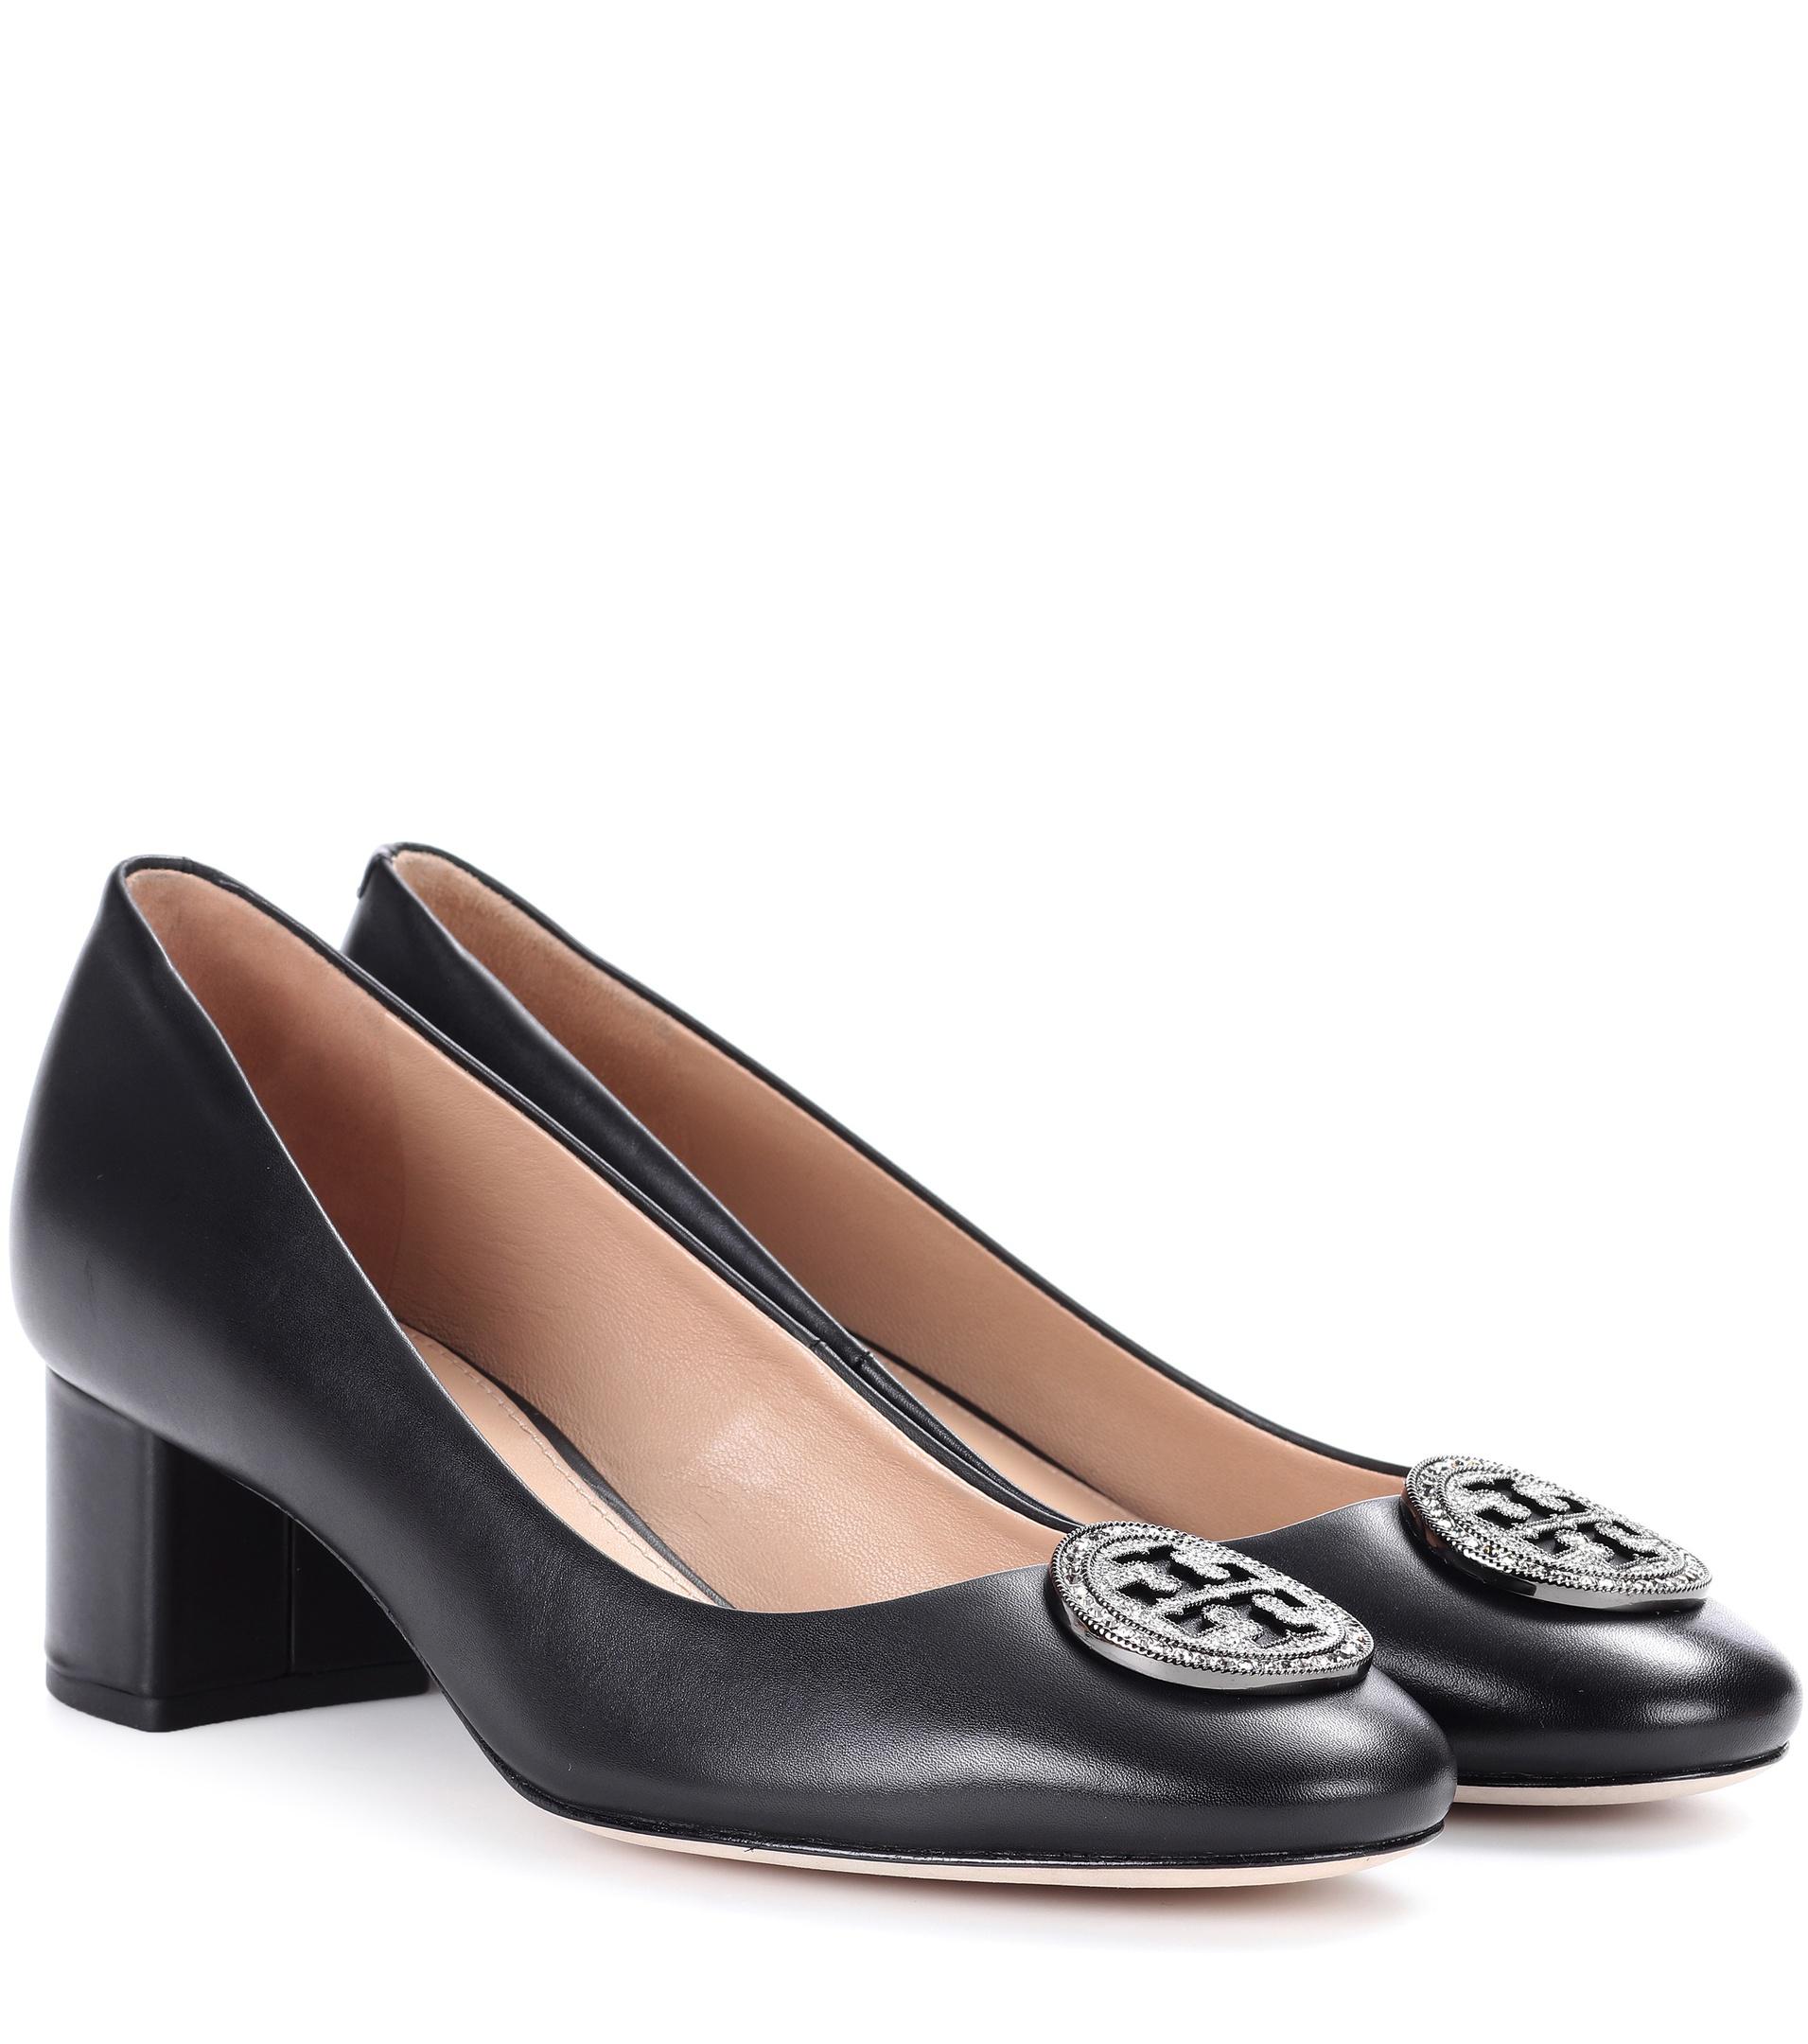 Tory Burch Liana Leather Pumps in Black 